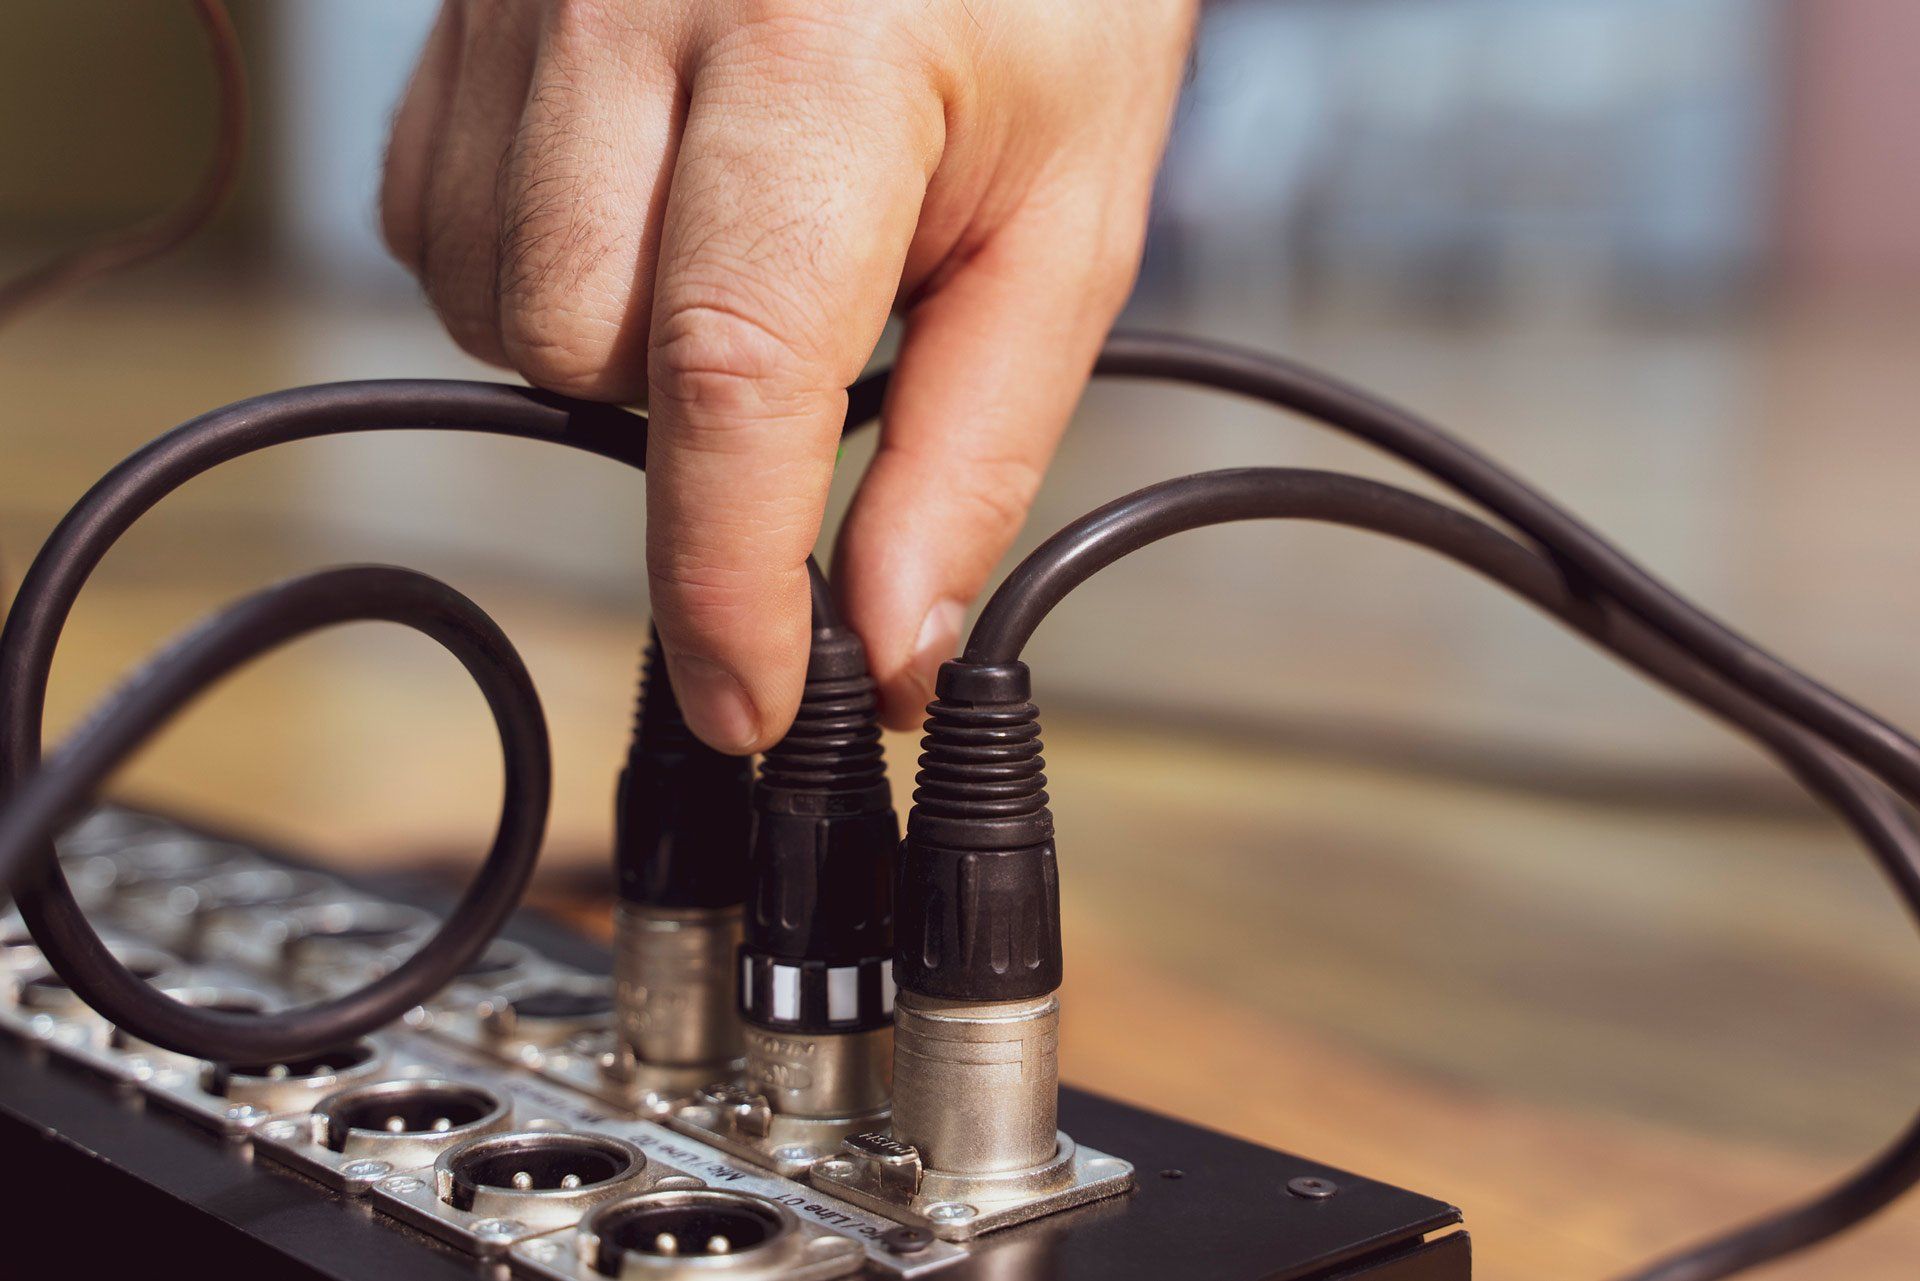 Hand Push Xlr Connector to the Analog Mixer Before Recording — Greater Sydney, Nsw — Connex Antenna & Security